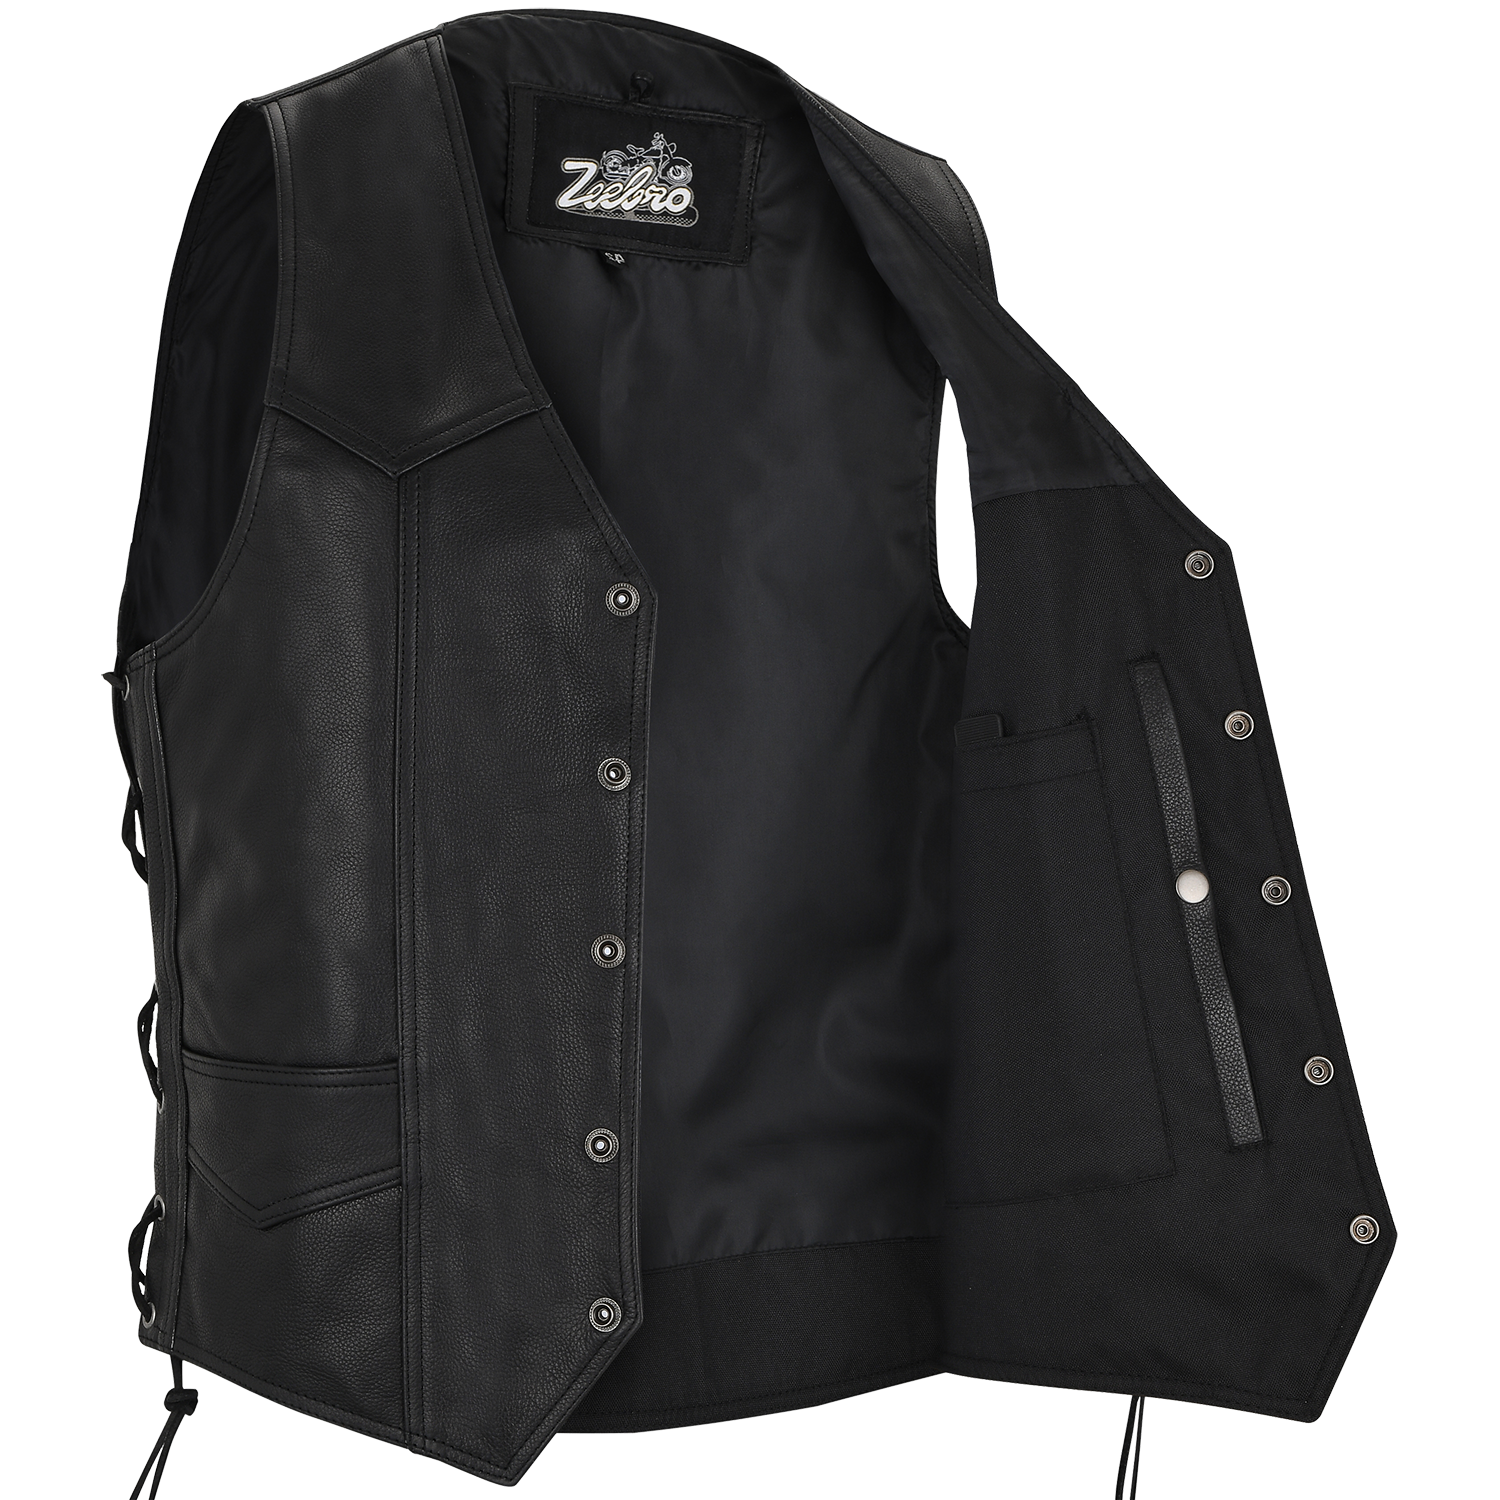 MC-03 Classic Black Leather Vest with Adjustable Lacing